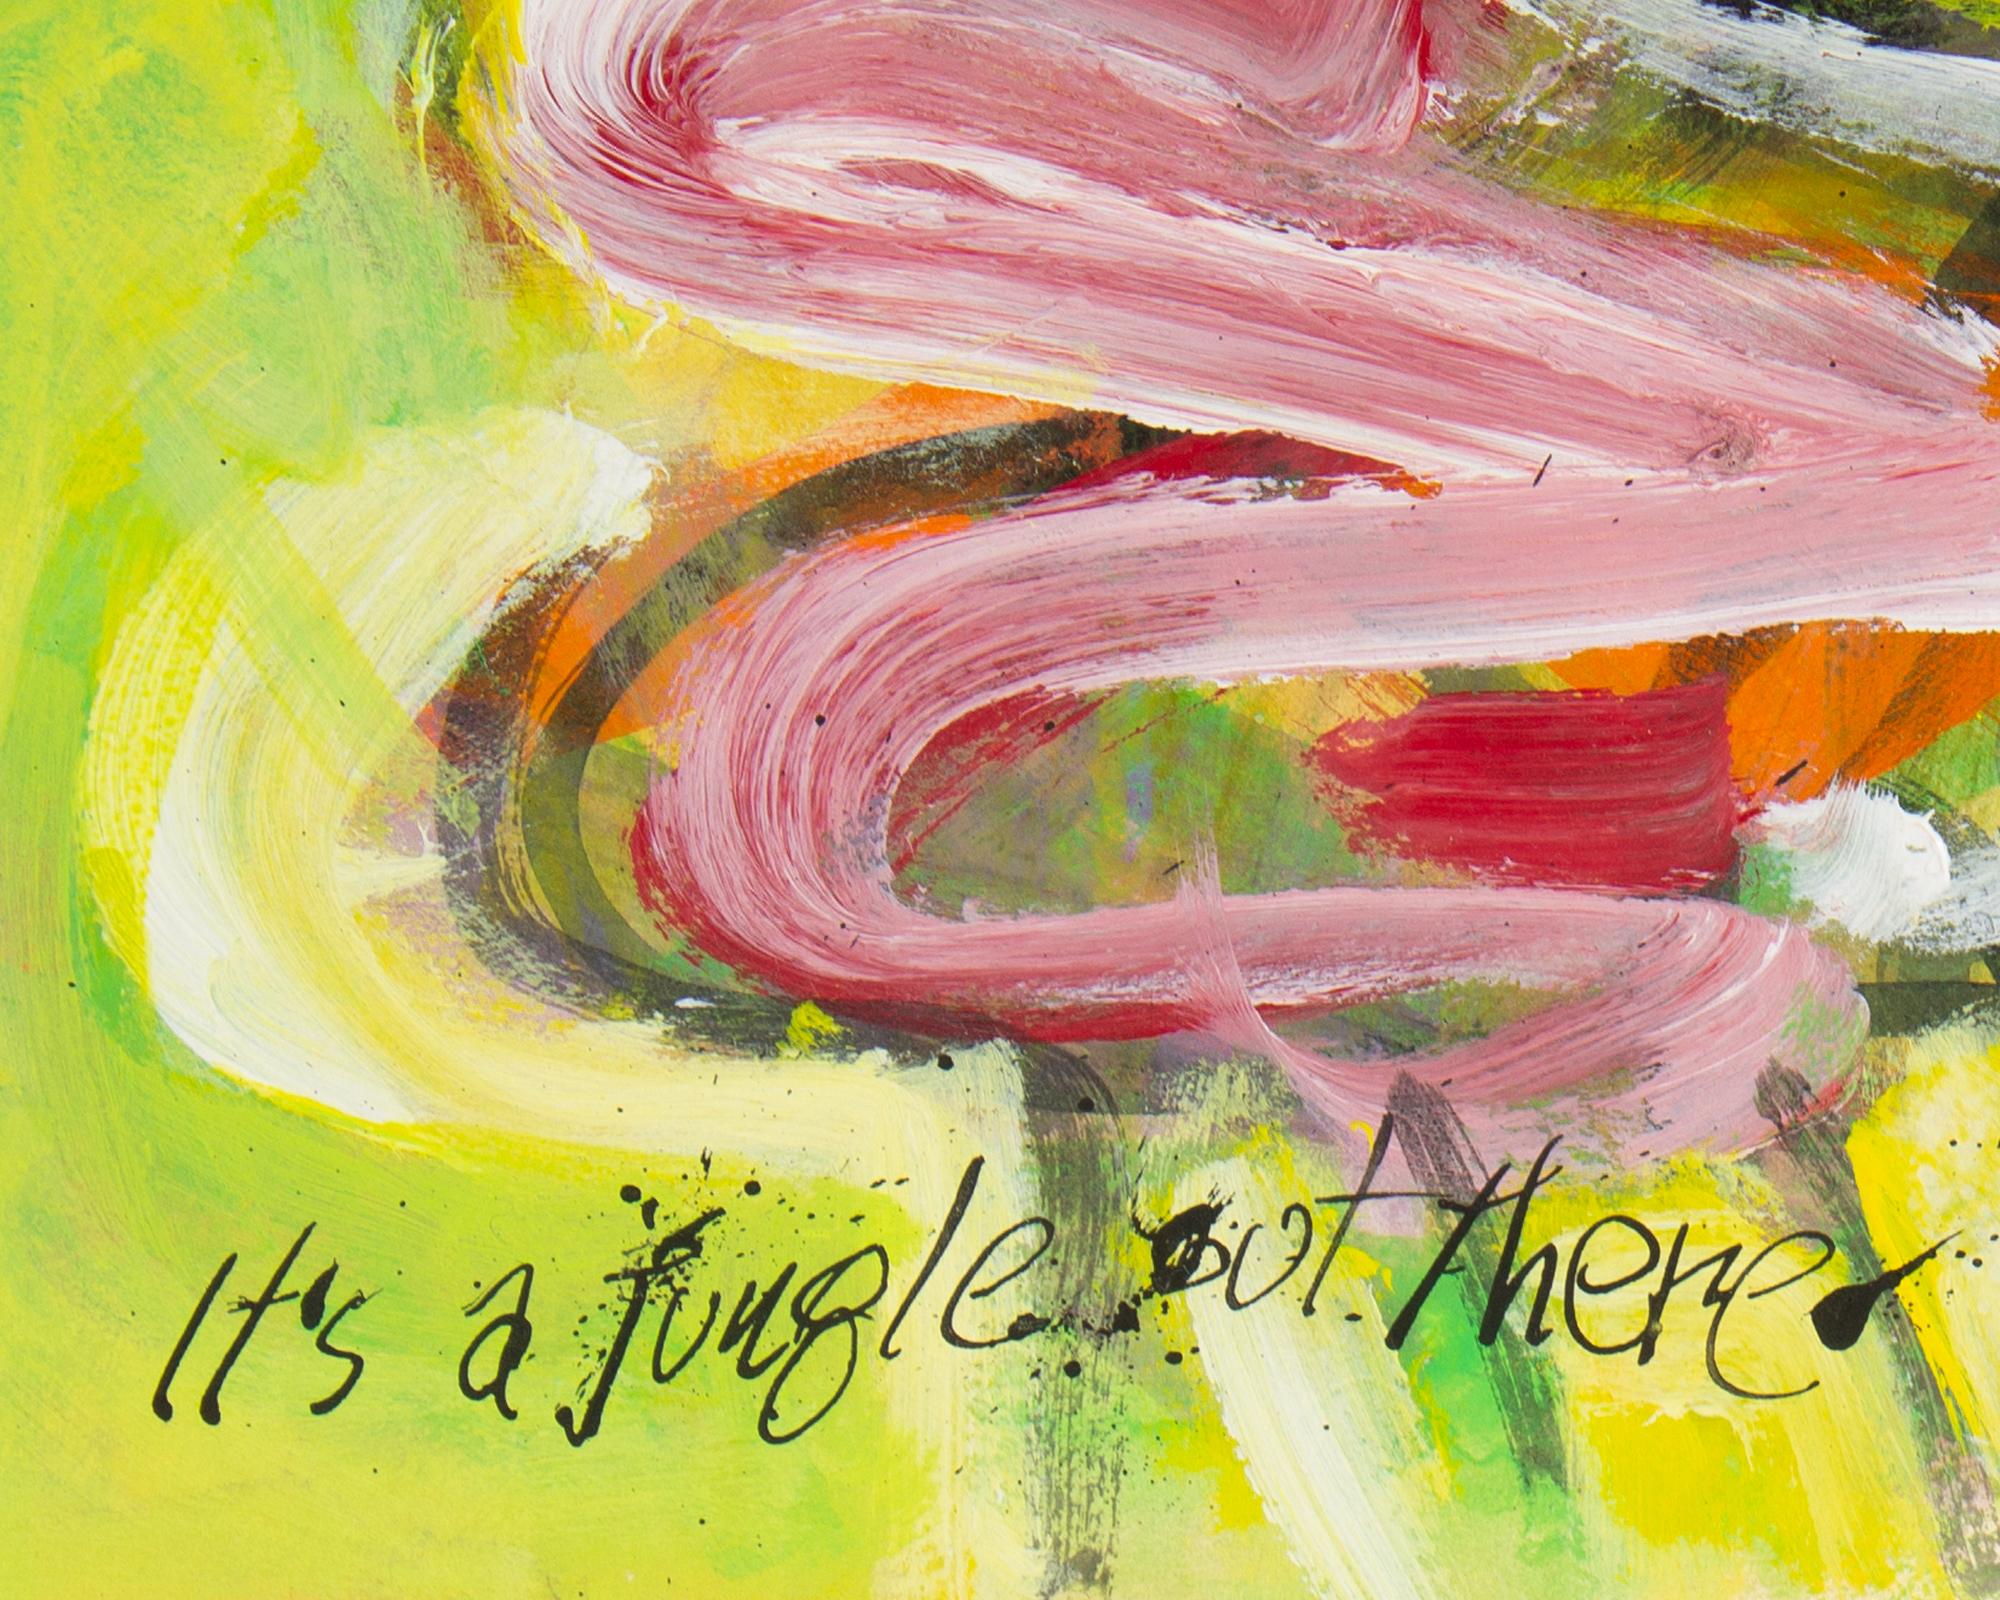 Modern James L. Bruch Signed 2011 “It’s a Jungle Out There” Mixed Media Painting For Sale